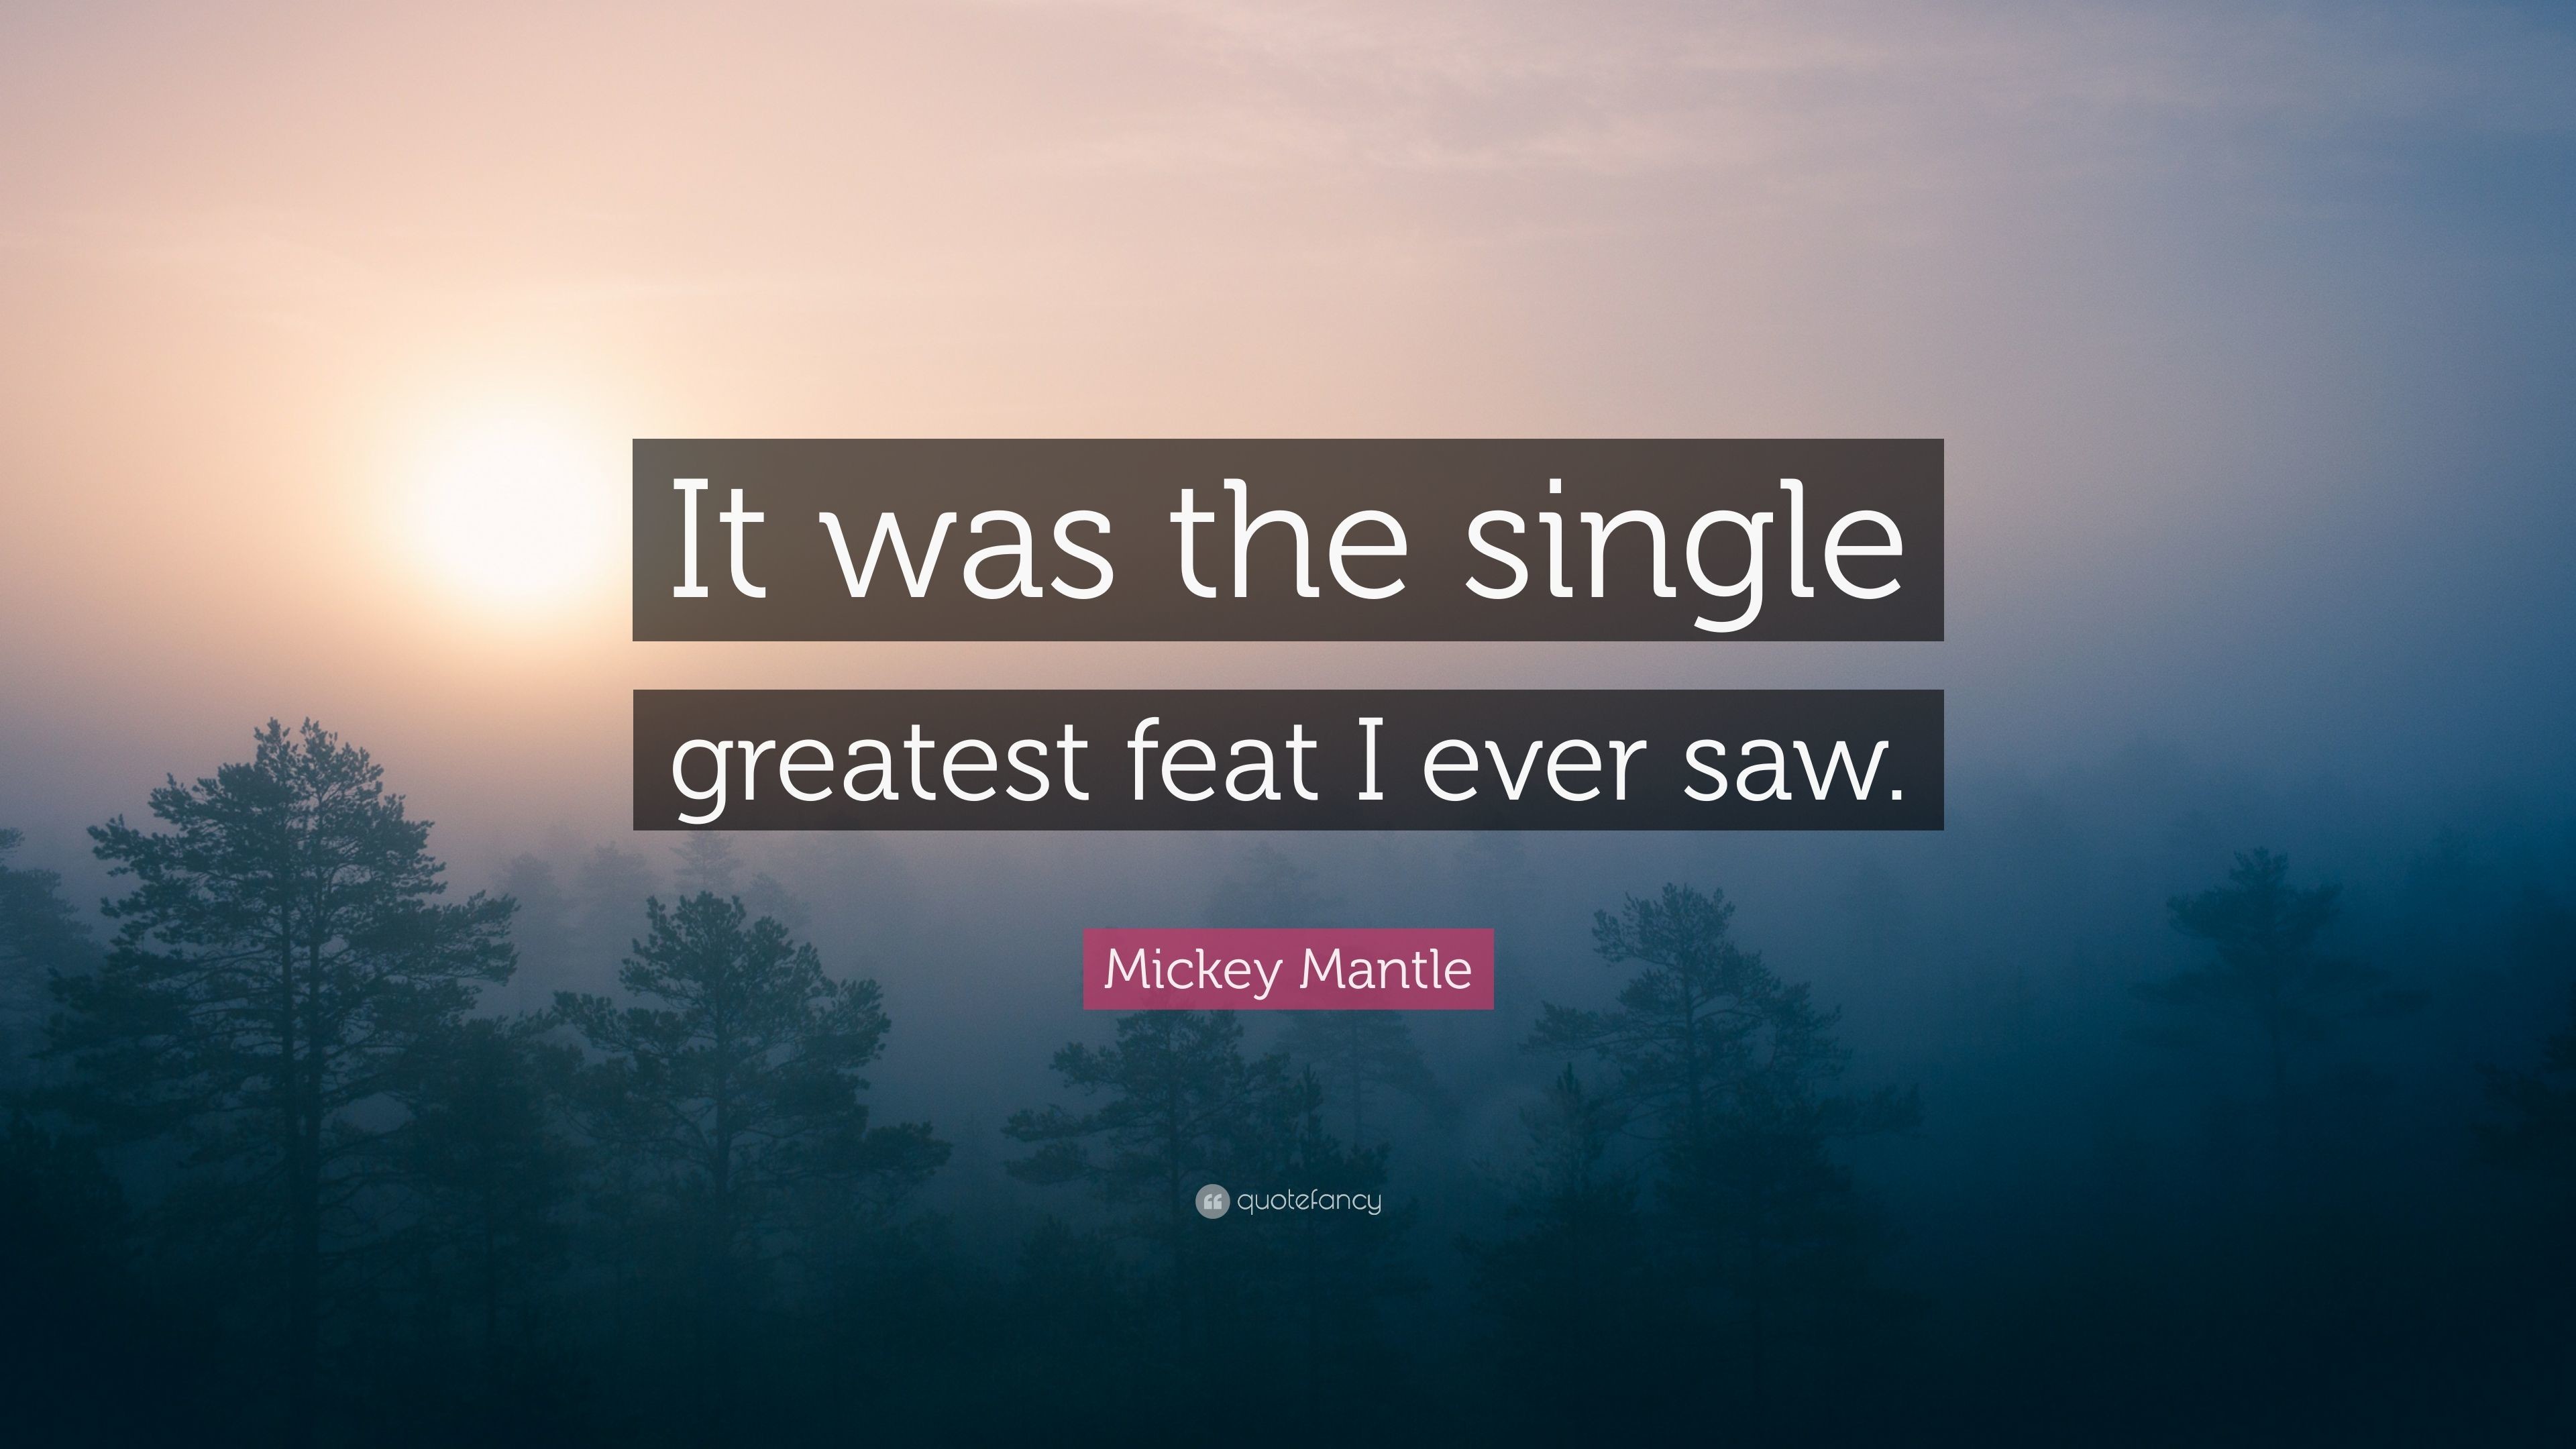 Mickey Mantle Quote It was the single greatest feat I ever saw.